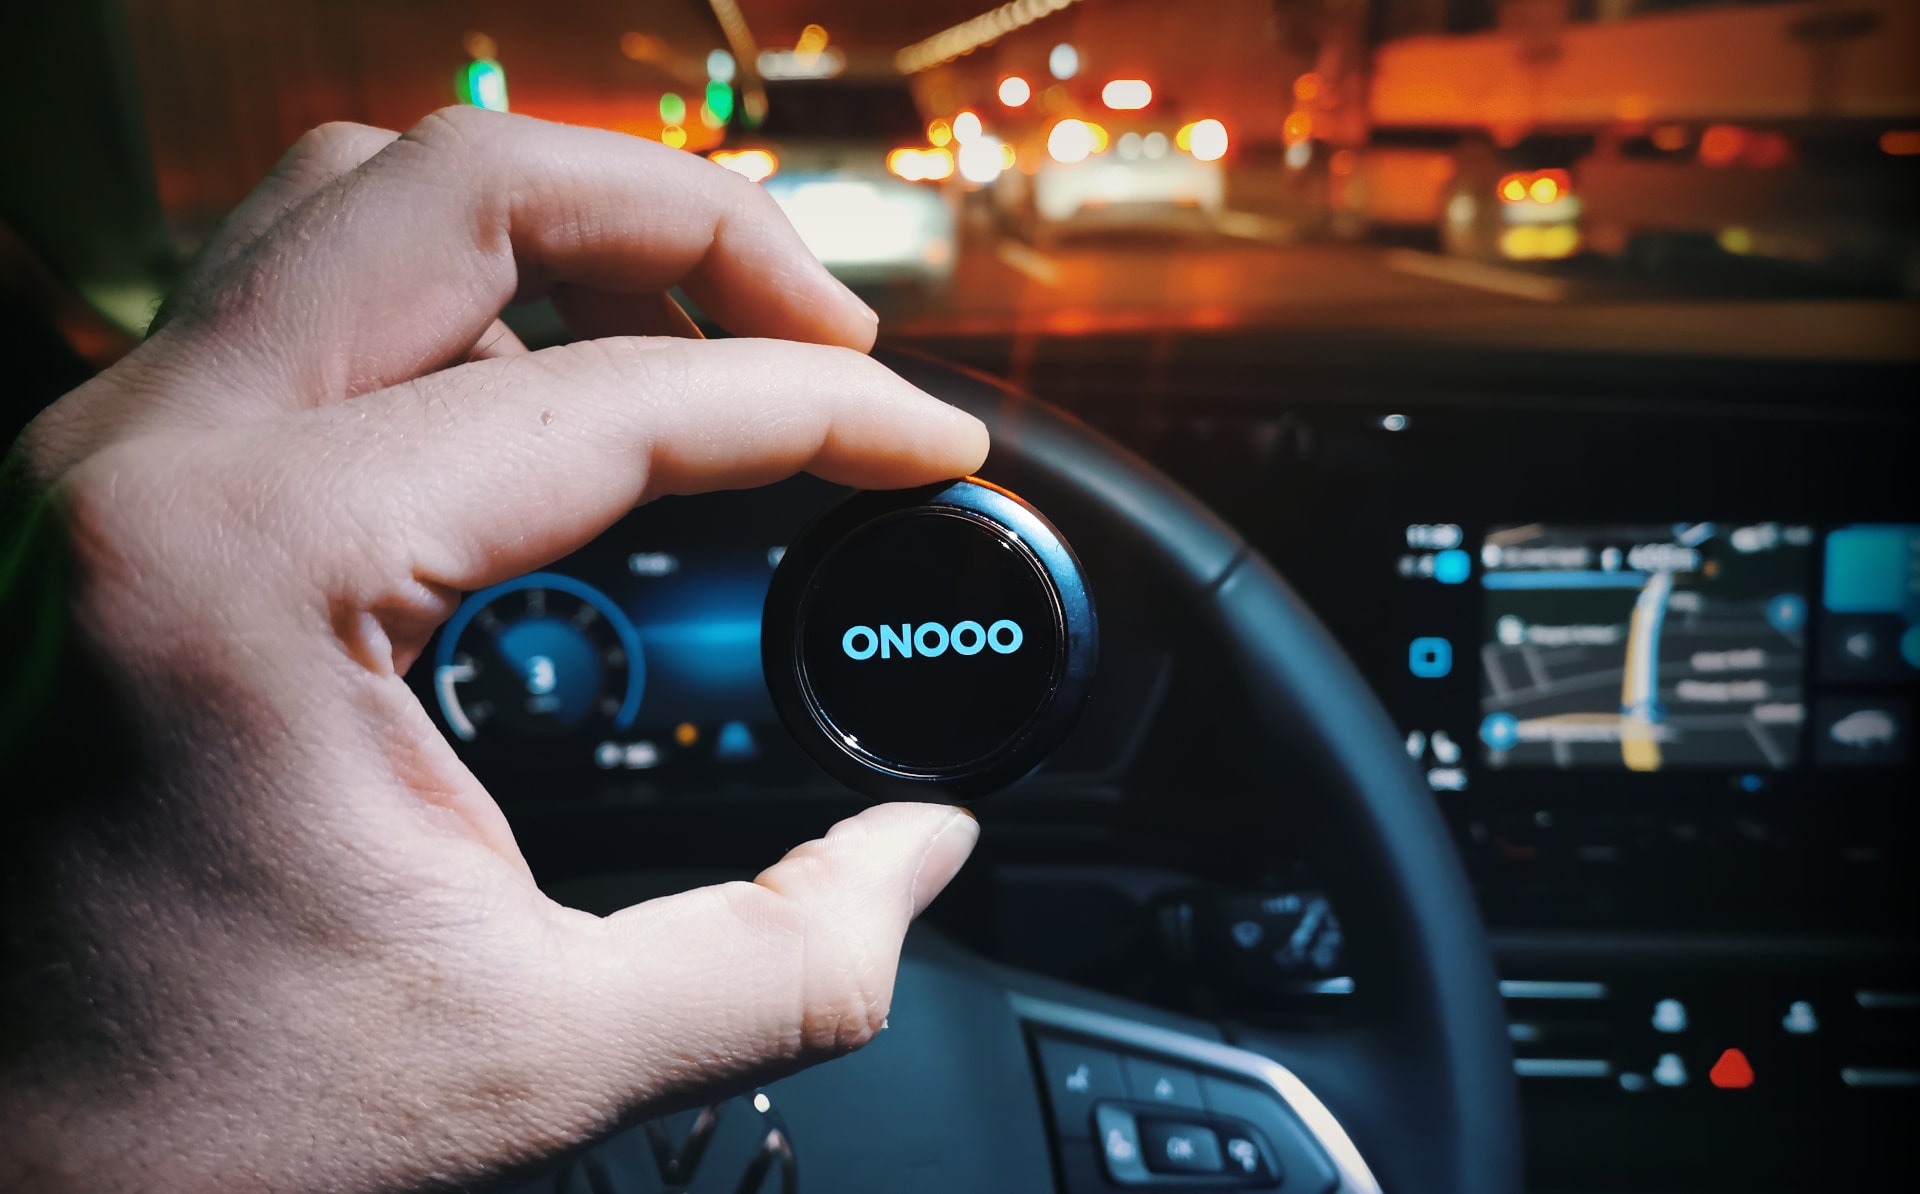 I tried the Ooono Co-Driver: It's handy if you want…